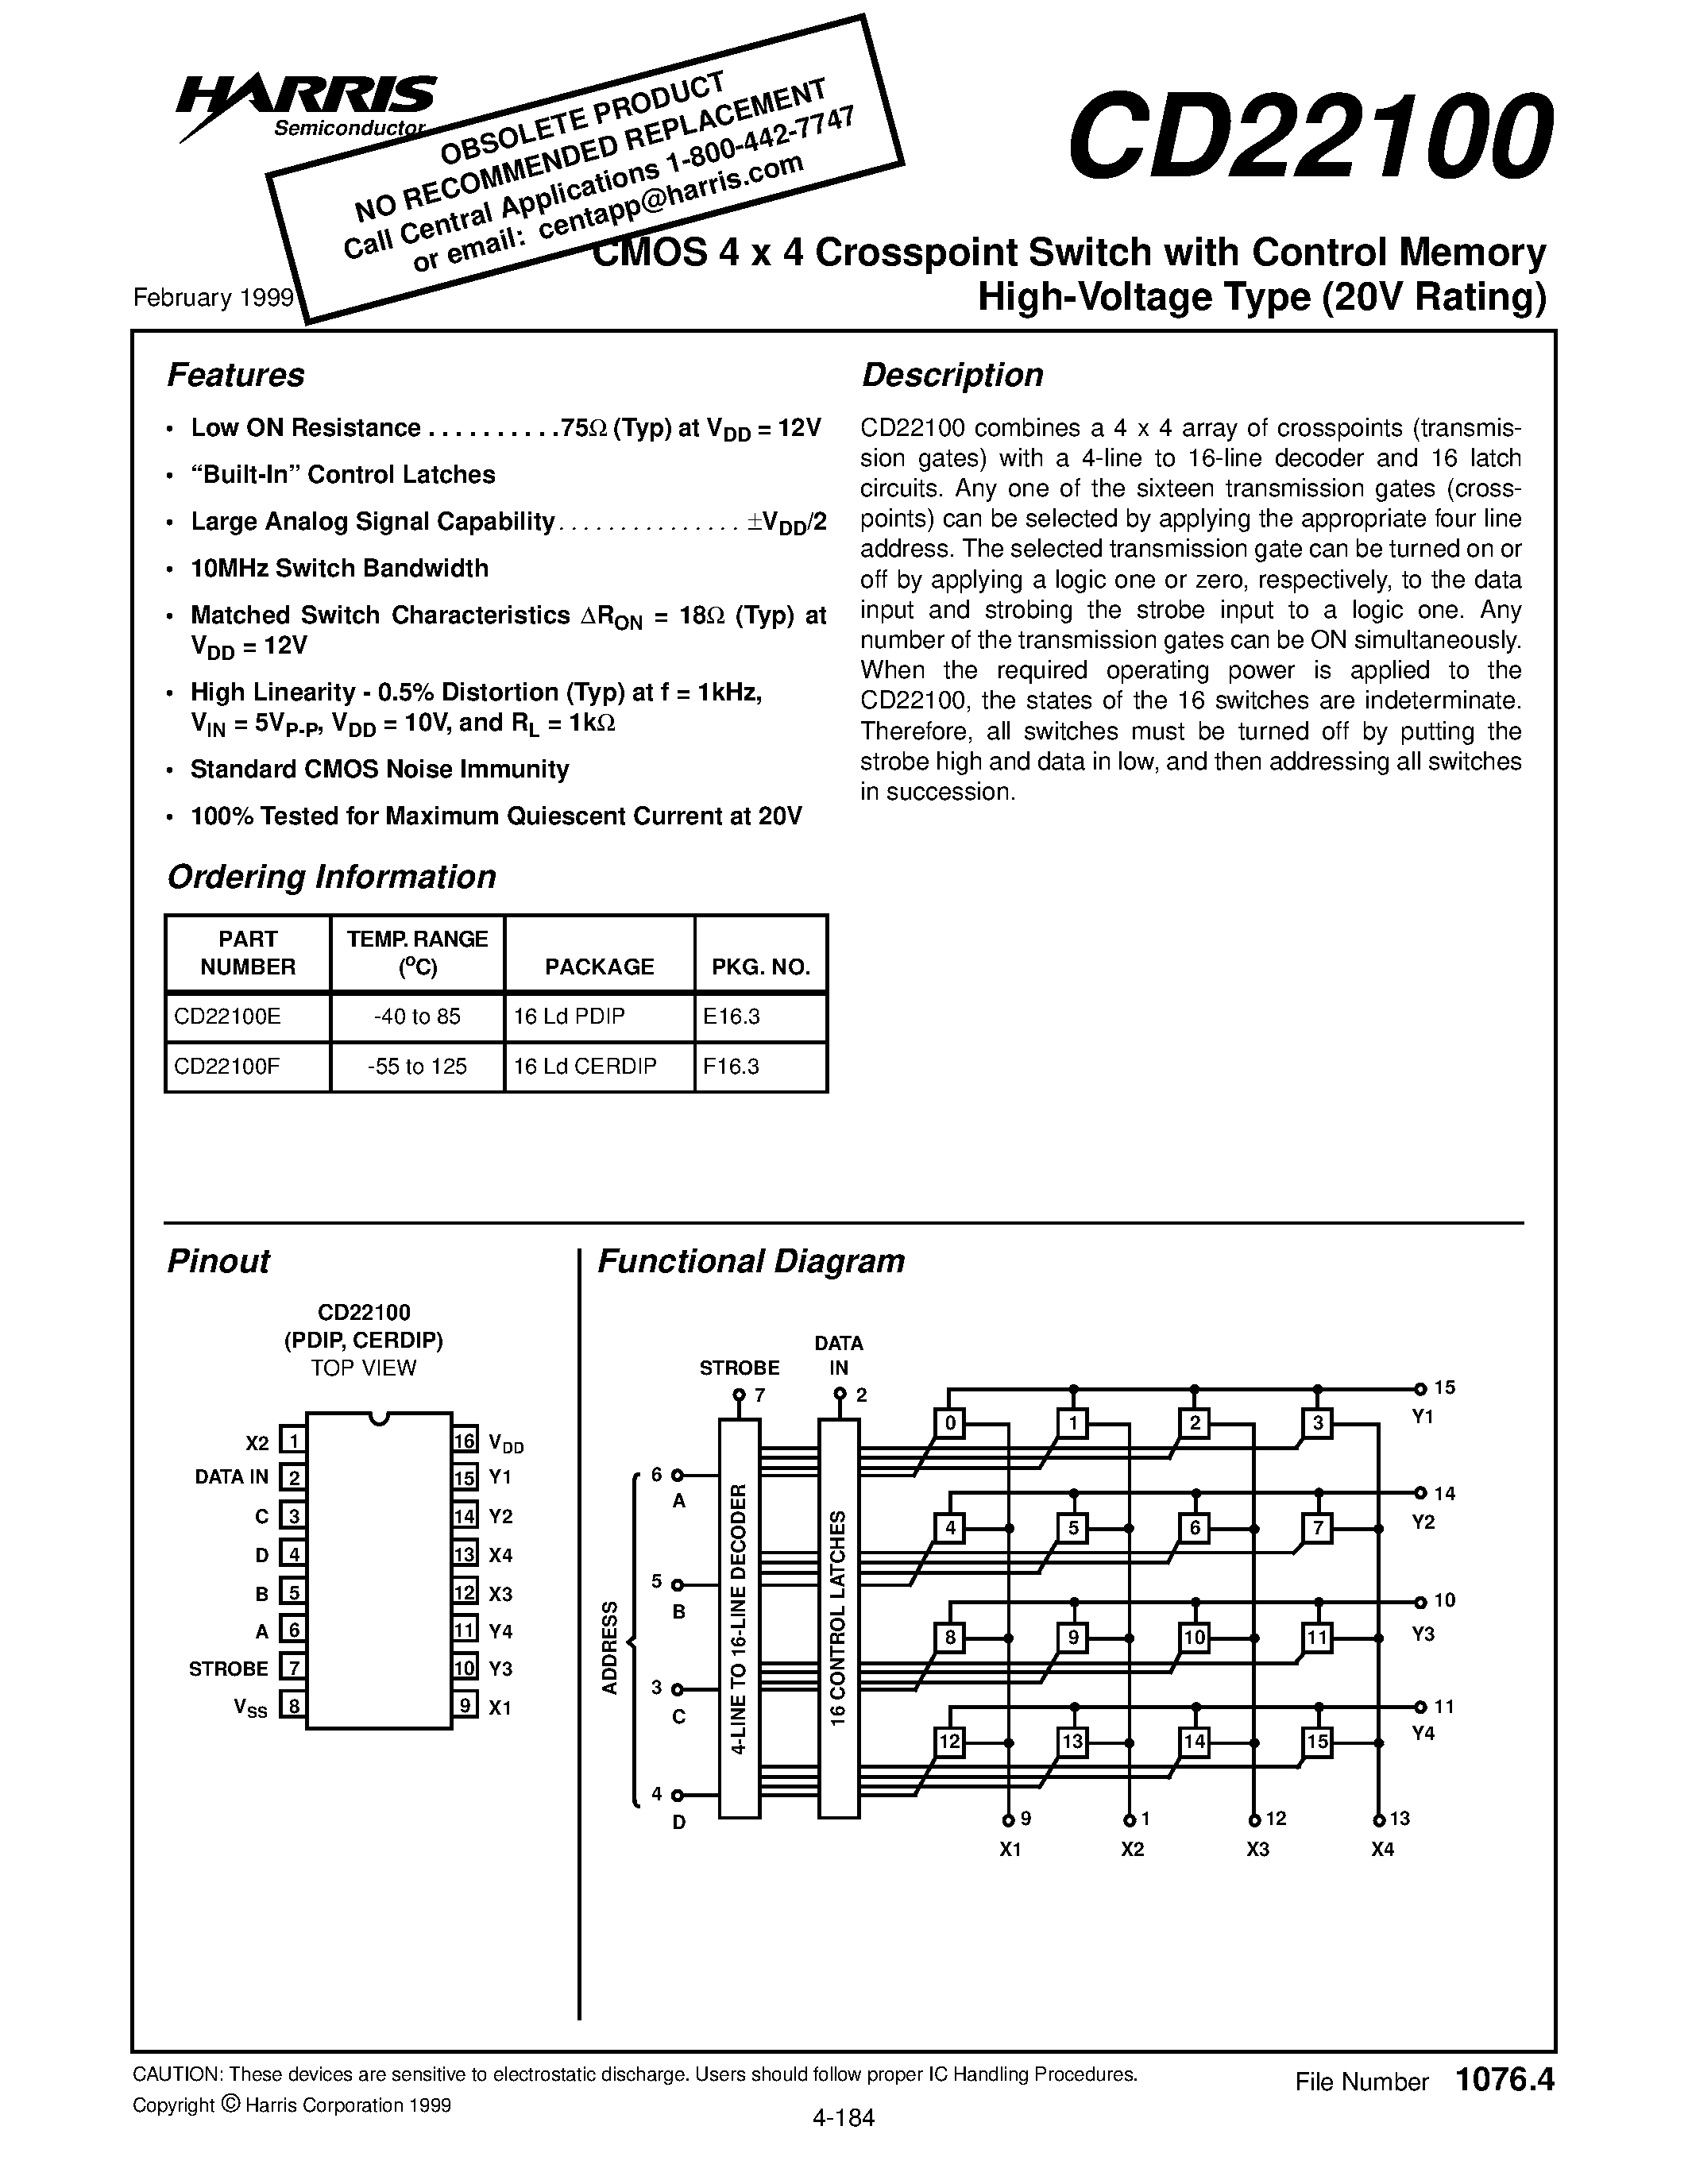 Datasheet CD22100F - CMOS 4 x 4 Crosspoint Switch with Control Memory High-Voltage Type (20V Rating) page 1